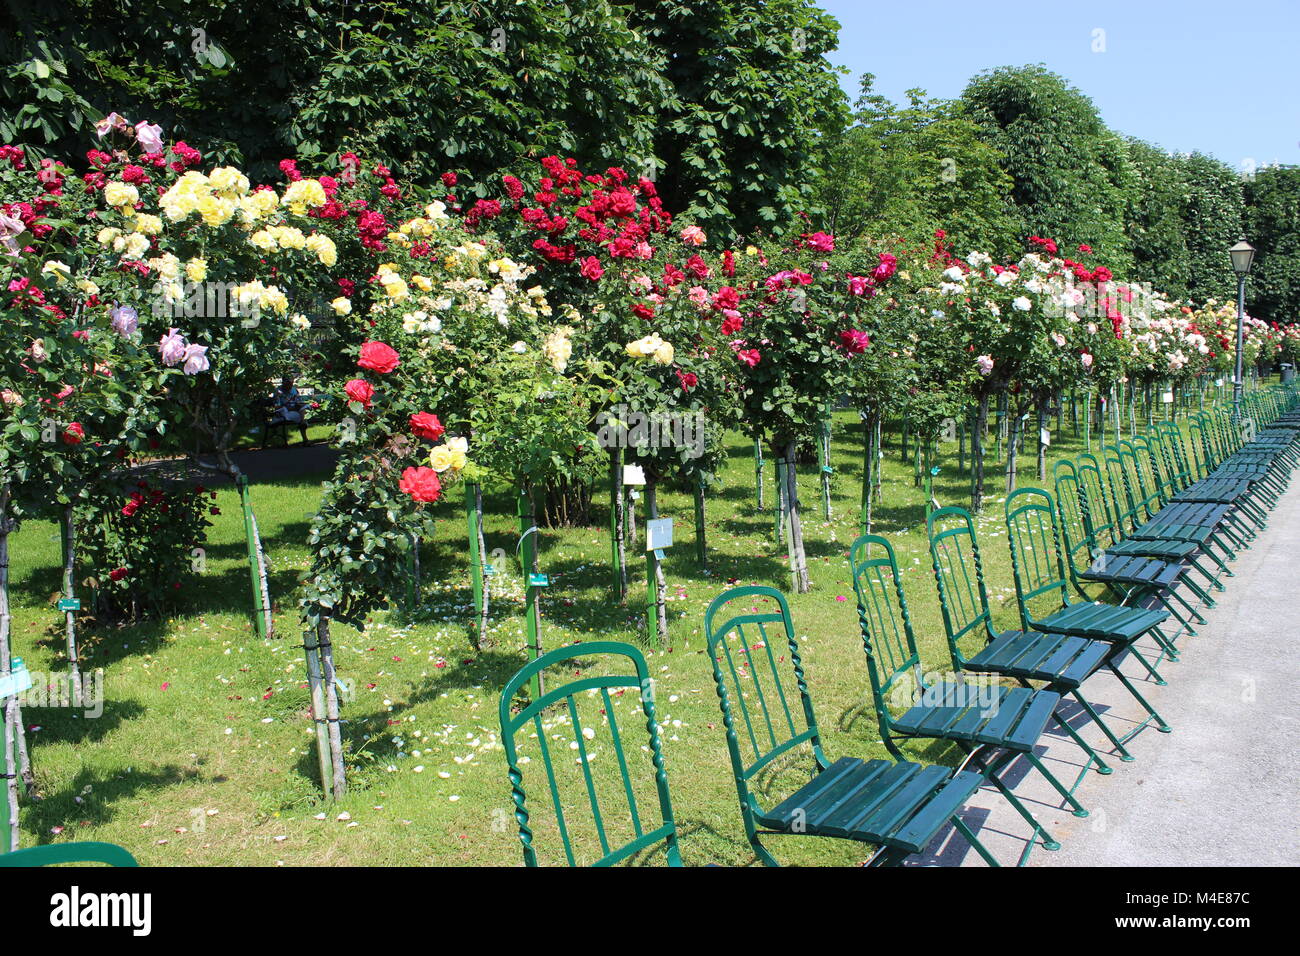 Empty row of seats in the rose garden Stock Photo